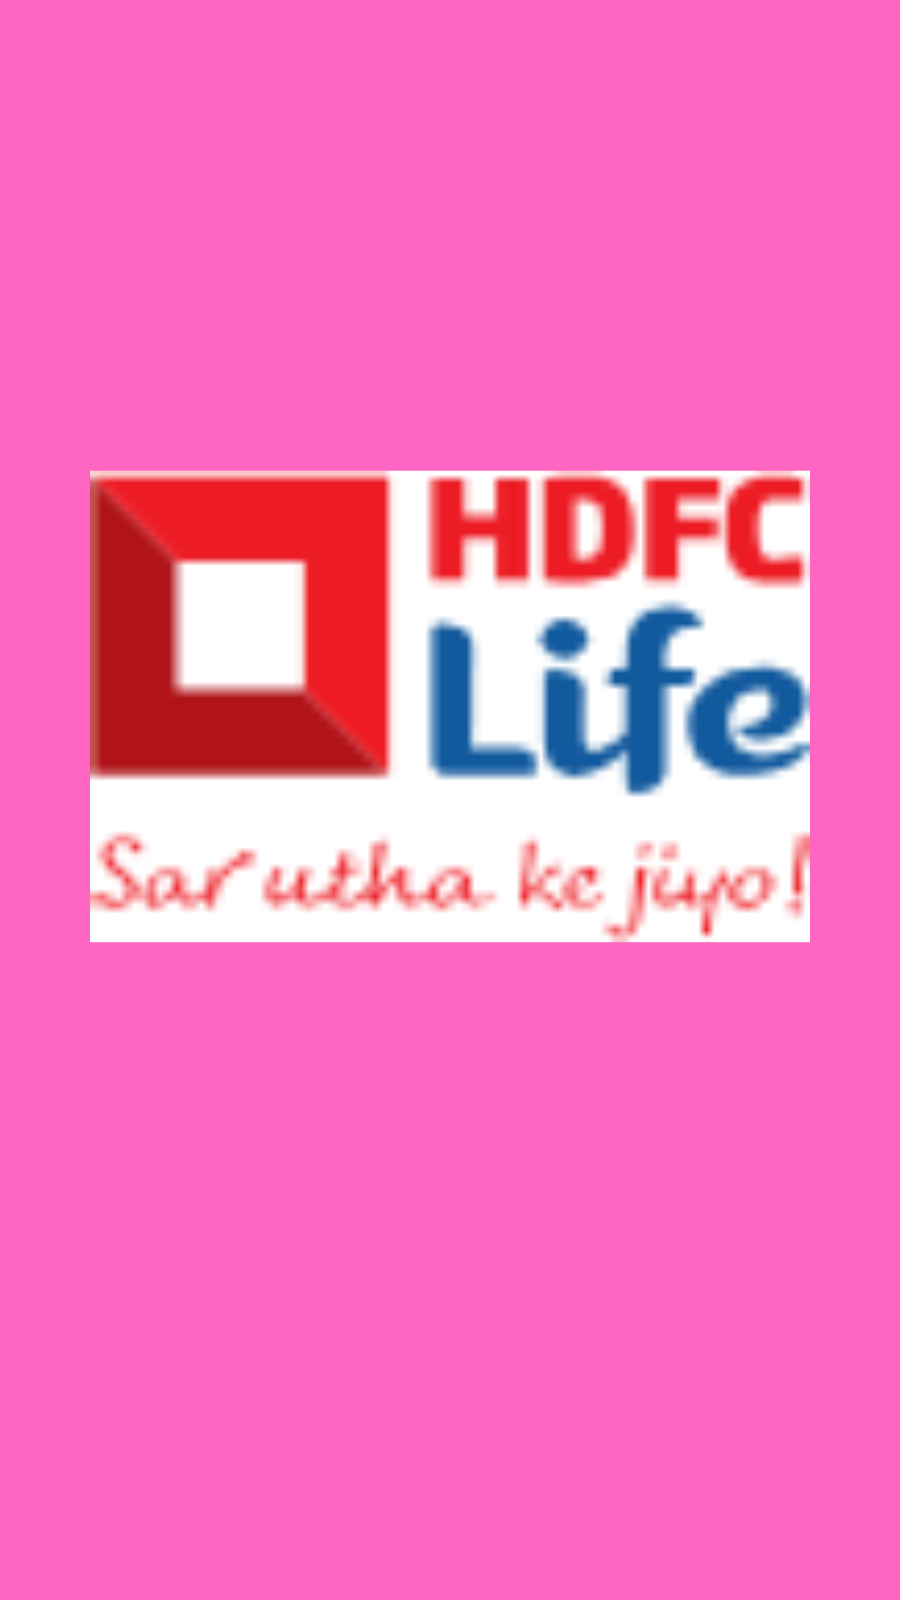 Share 139 Hdfc Life Logo Download Latest Vn 1750